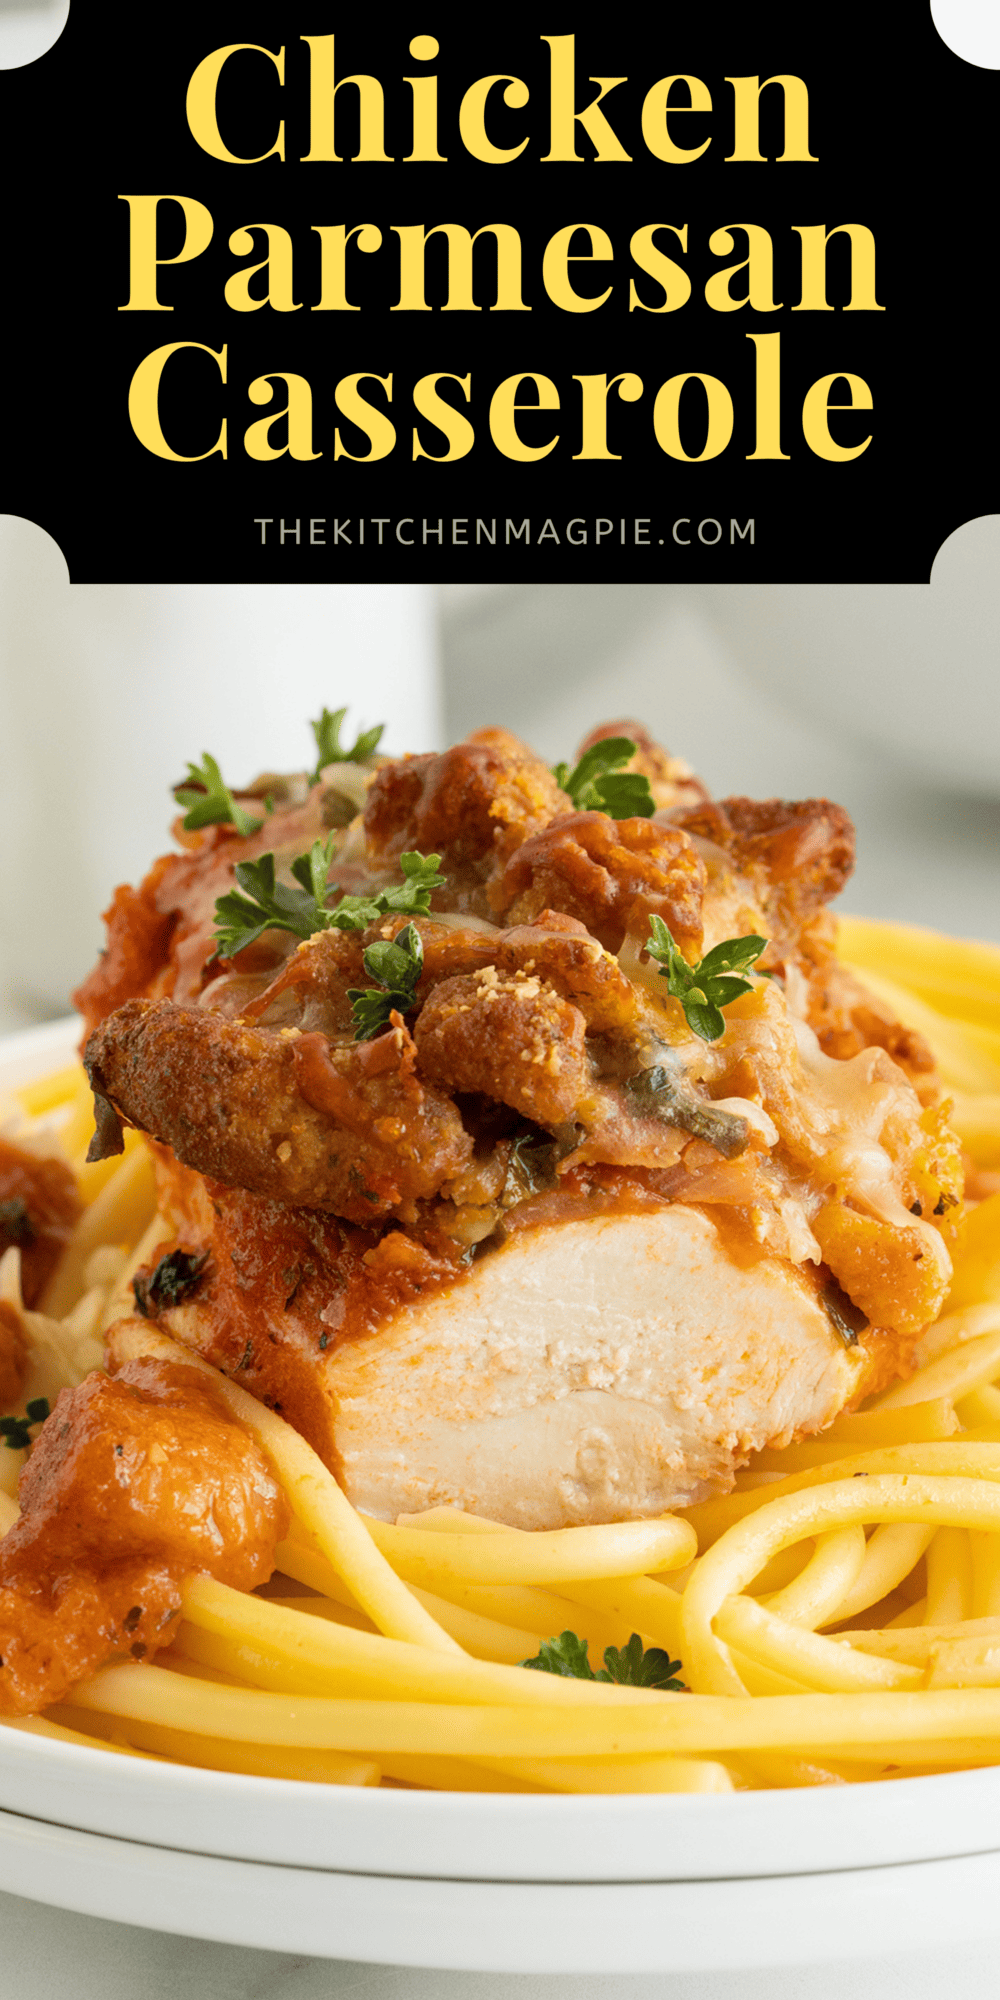 Chicken Parmesan Casserole! Easy, delicious and perfect for those busy weekdays! You can double this perfectly!